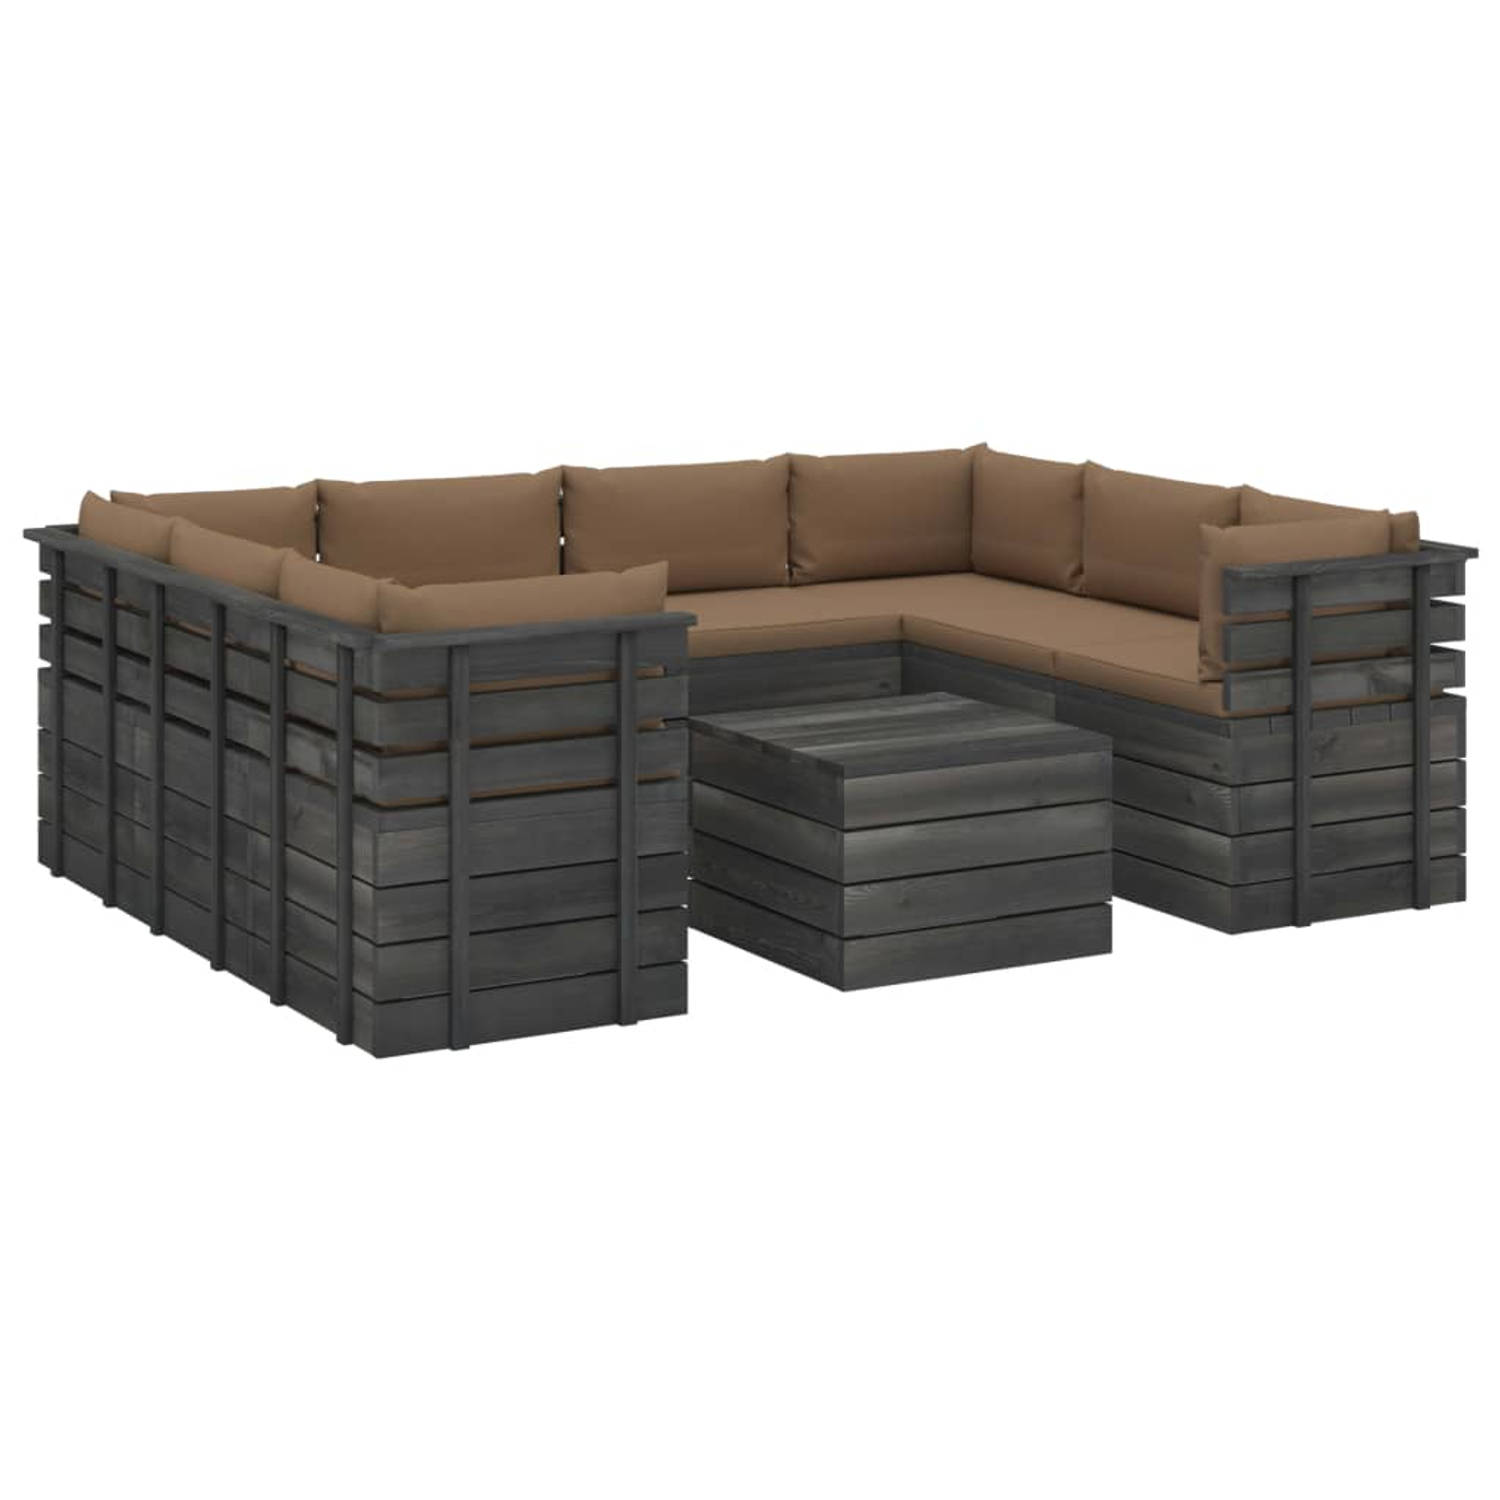 The Living Store Pallet Tuinset - Houten Loungeset - Massief Grenenhout - Taupe Kussens